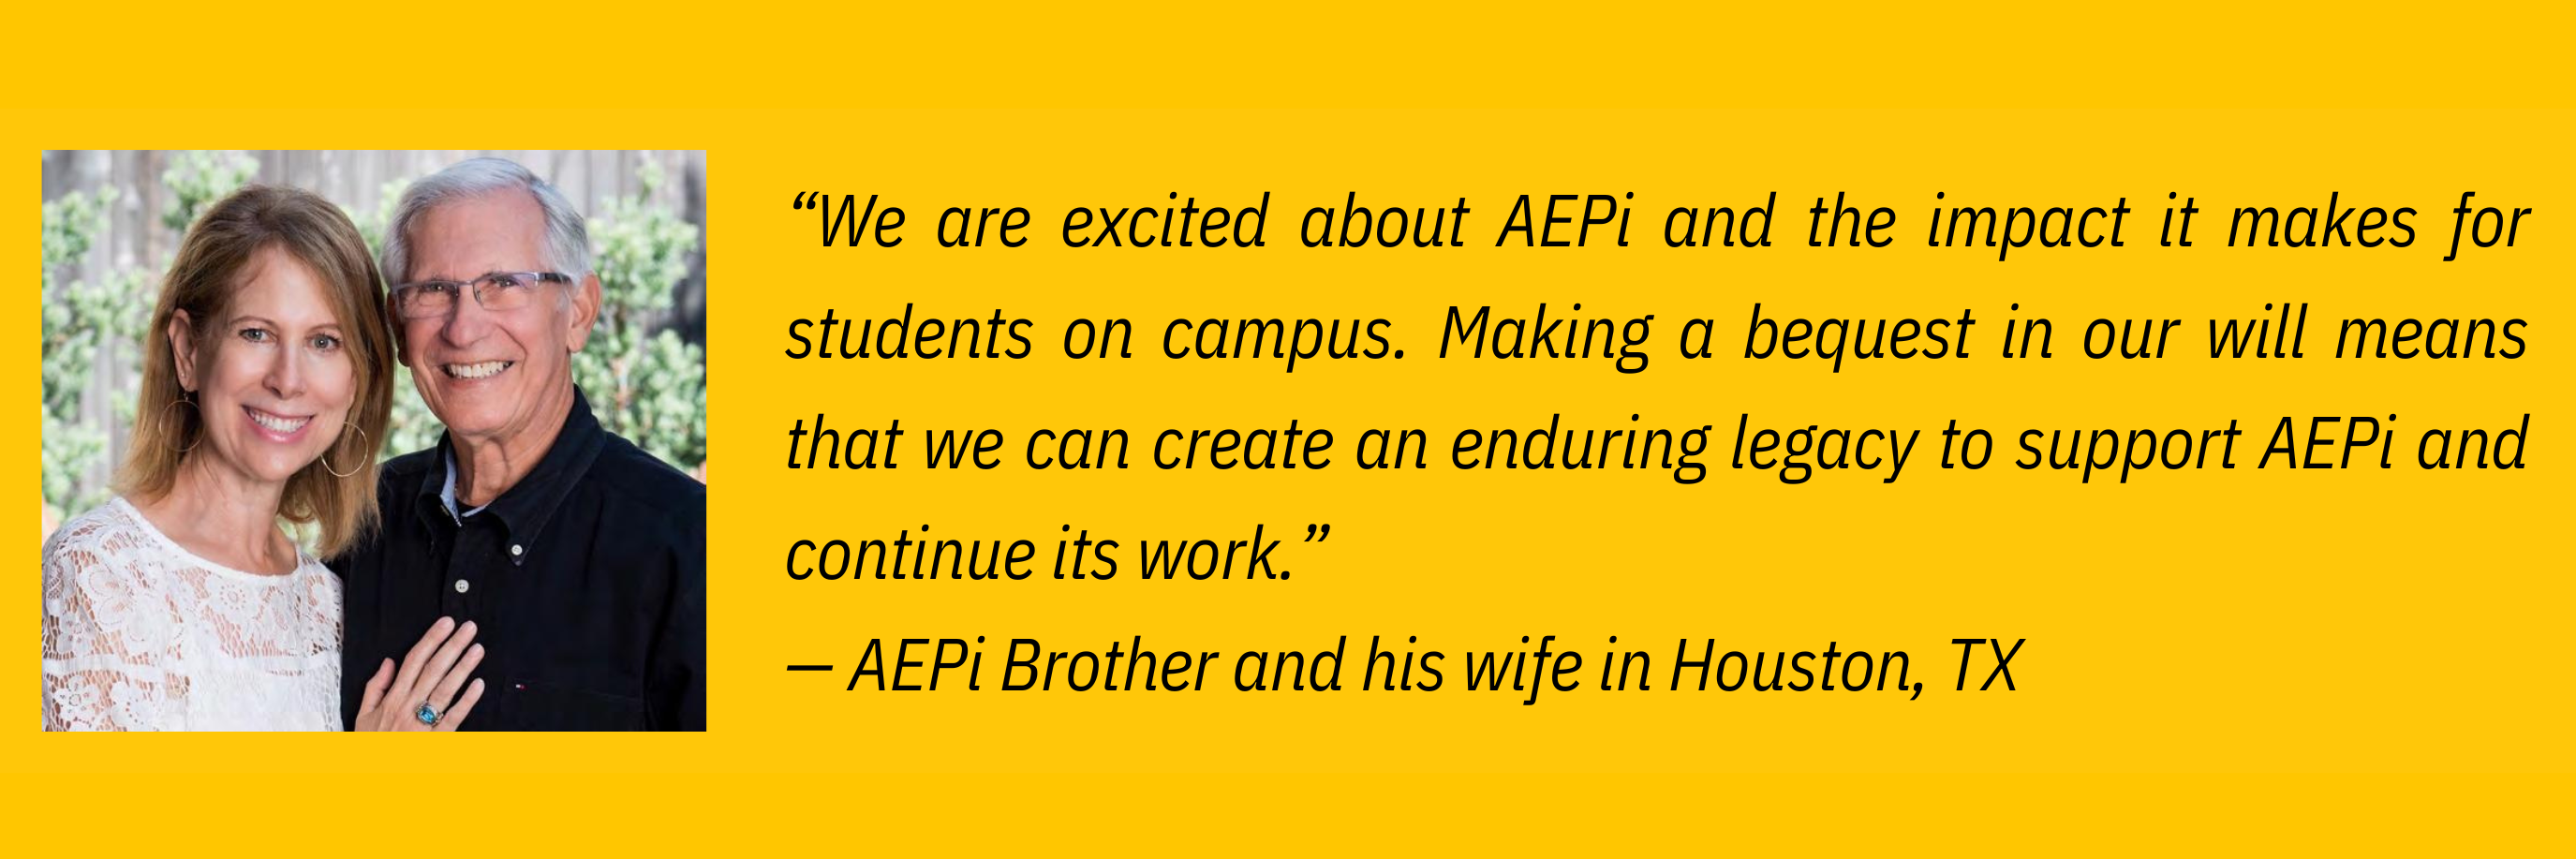 “I already make an annual gift, but in honor of AEPi’s new Legacy Campaign I have made an additional 5-year pledge to help support new Foundation initiatives.” — AEPi Alumnus in Atlanta, GA-3